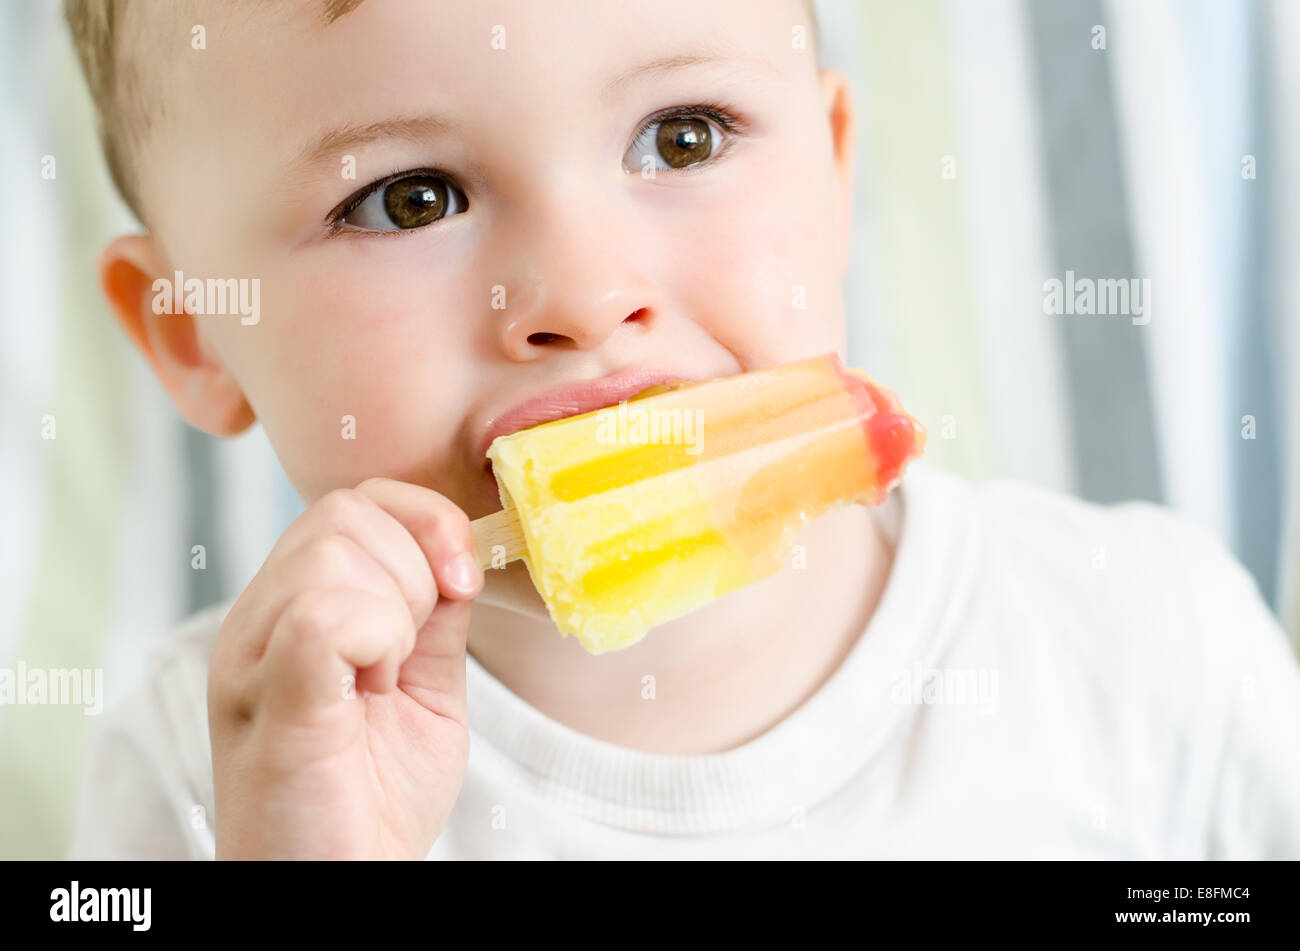 Baby Boy eating ice lolly Banque D'Images